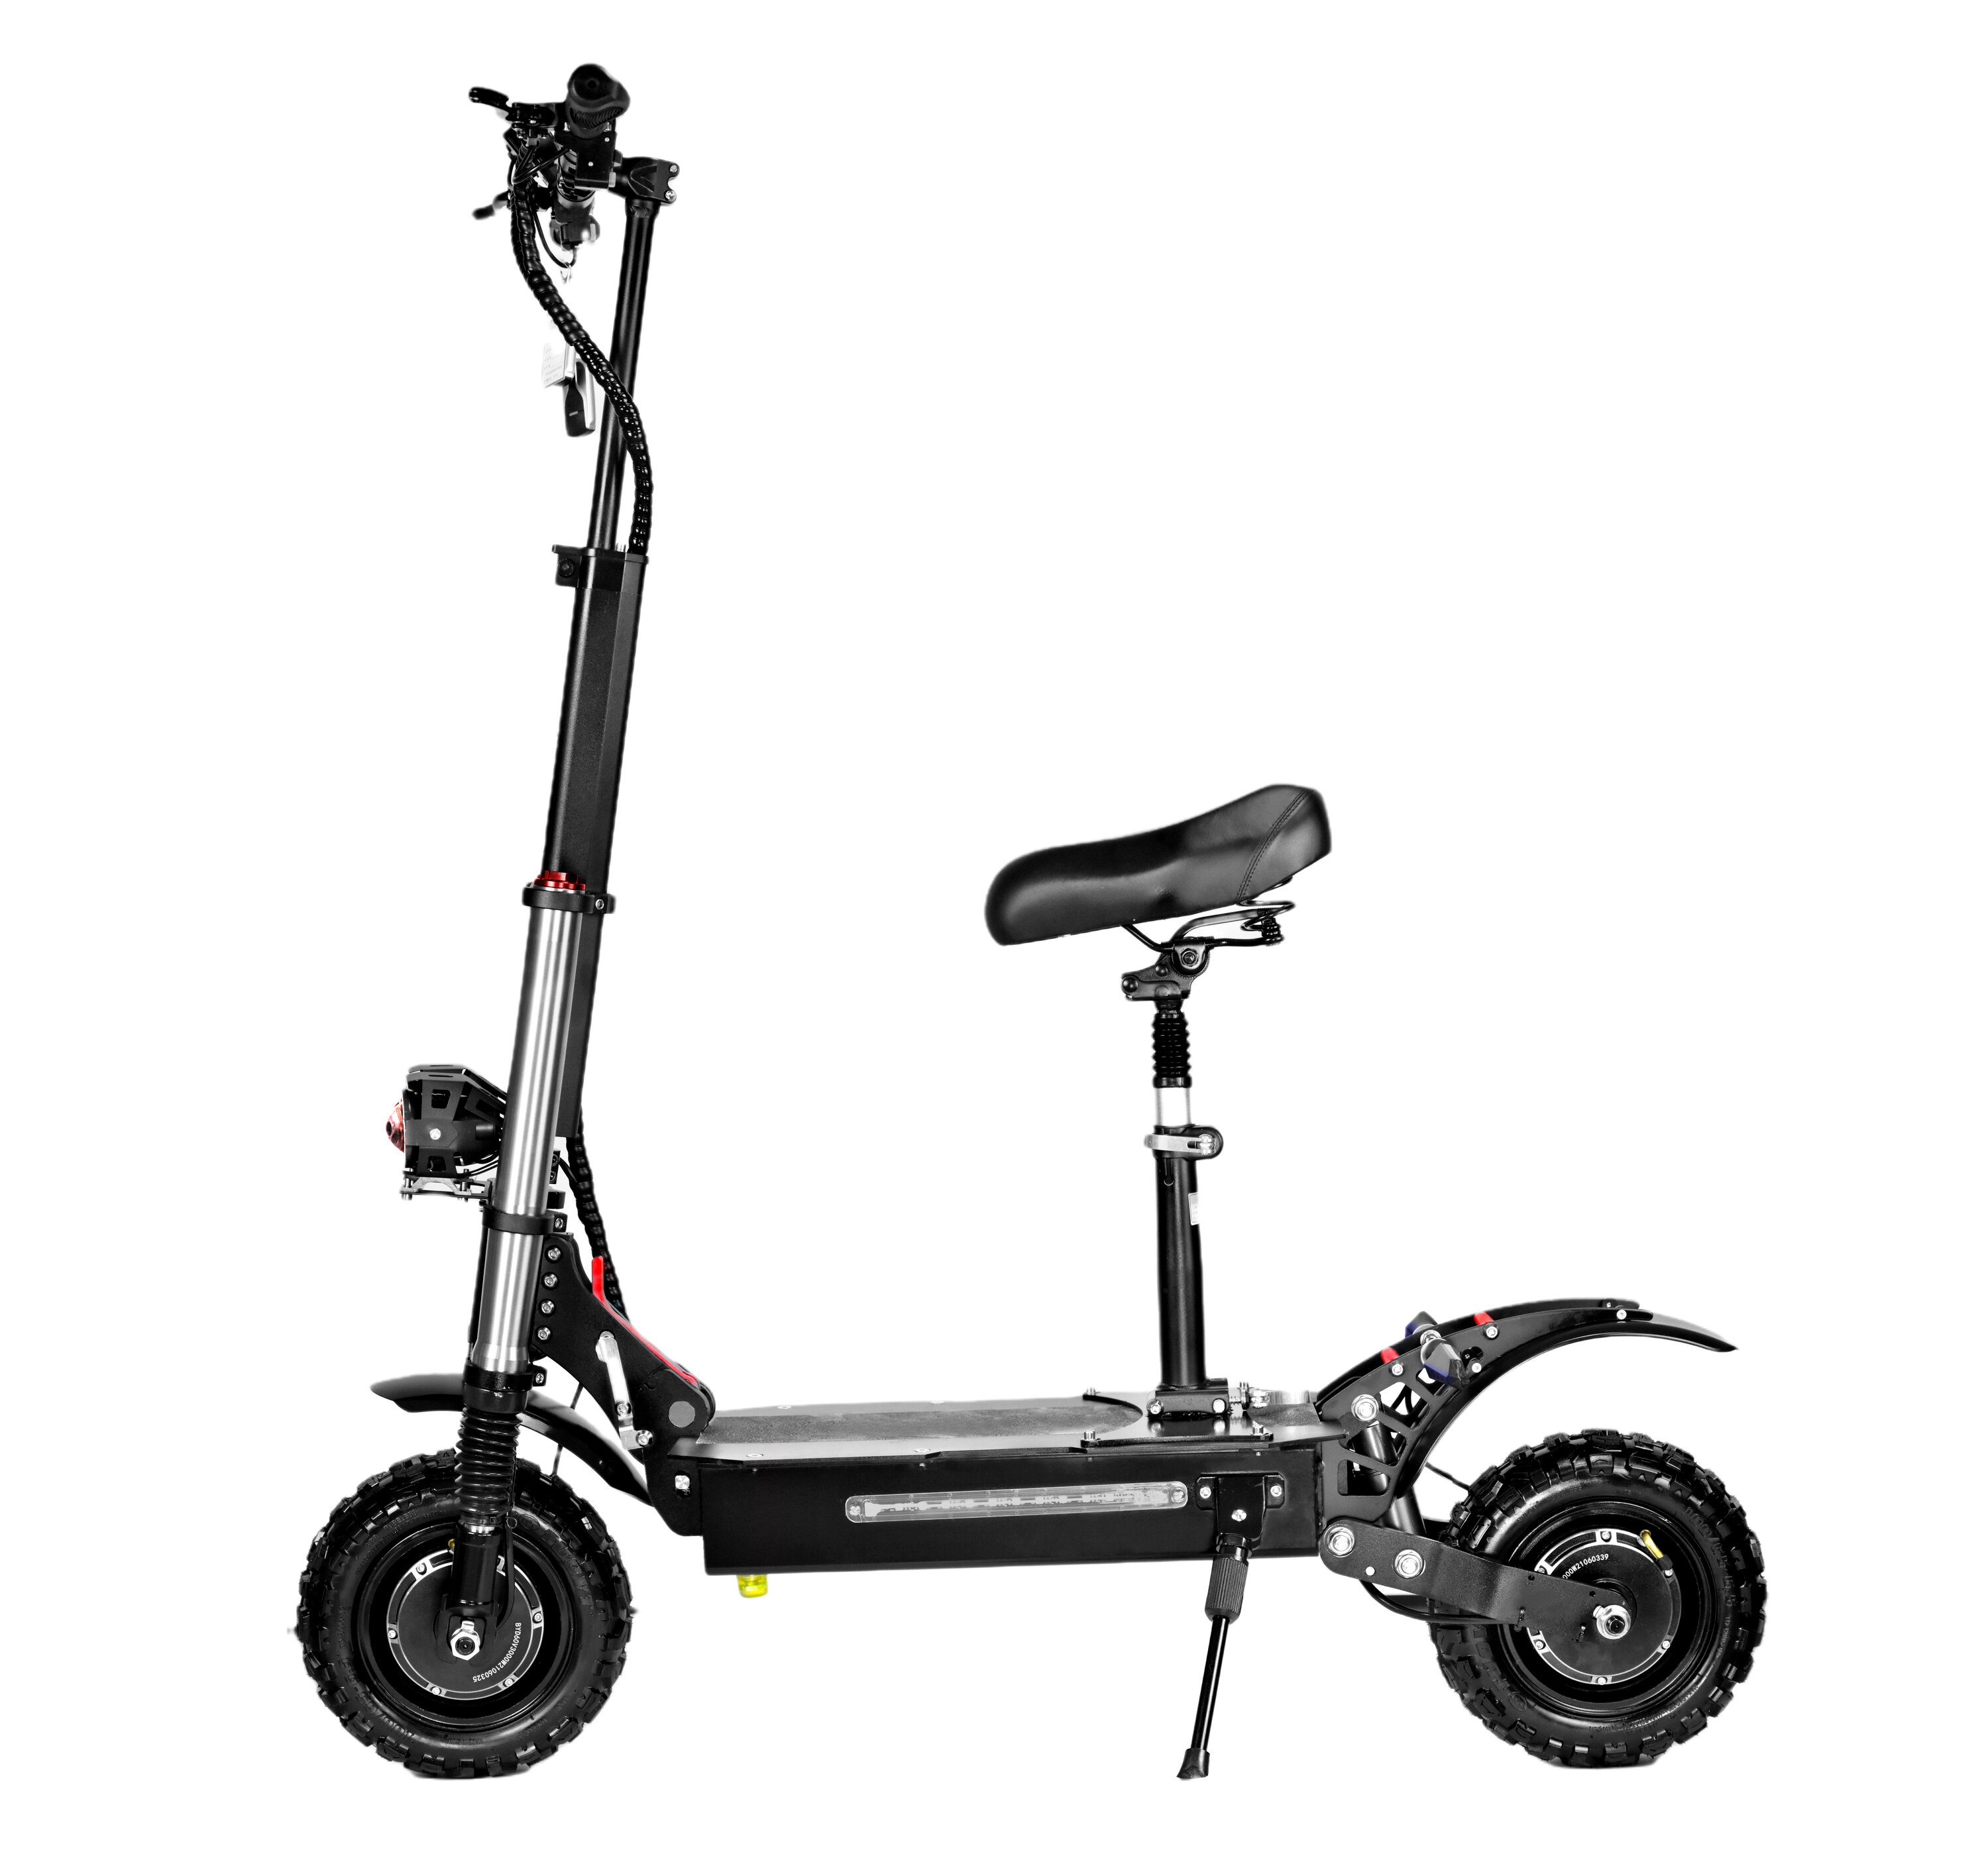 best price,boyueda,s3,38ah,6000w,60v,oil,brake,inch,electric,scooter,discount